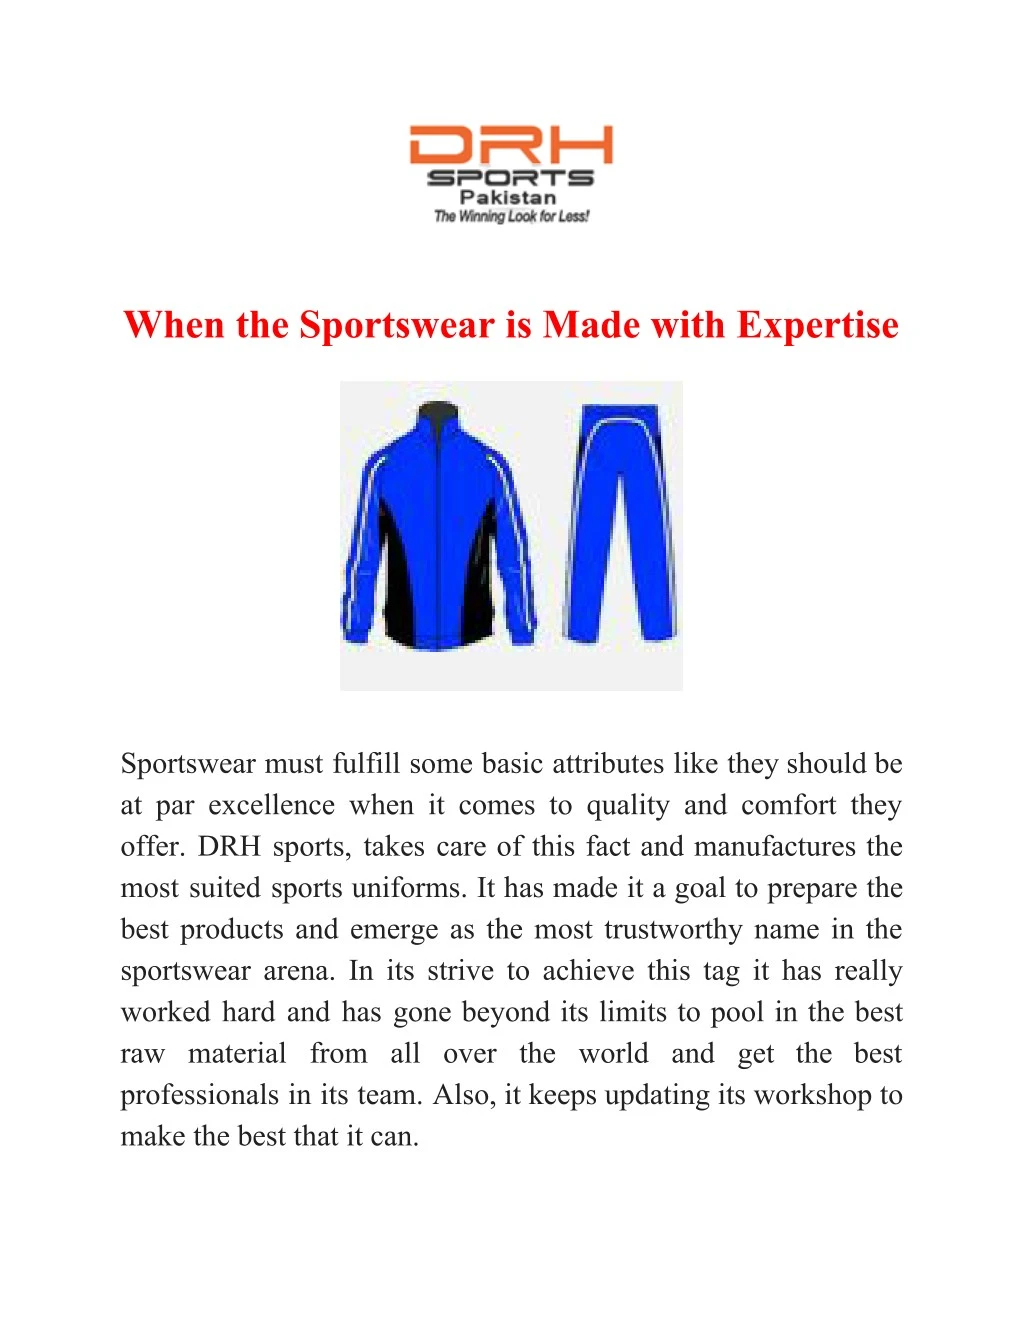 when the sportswear is made with expertise